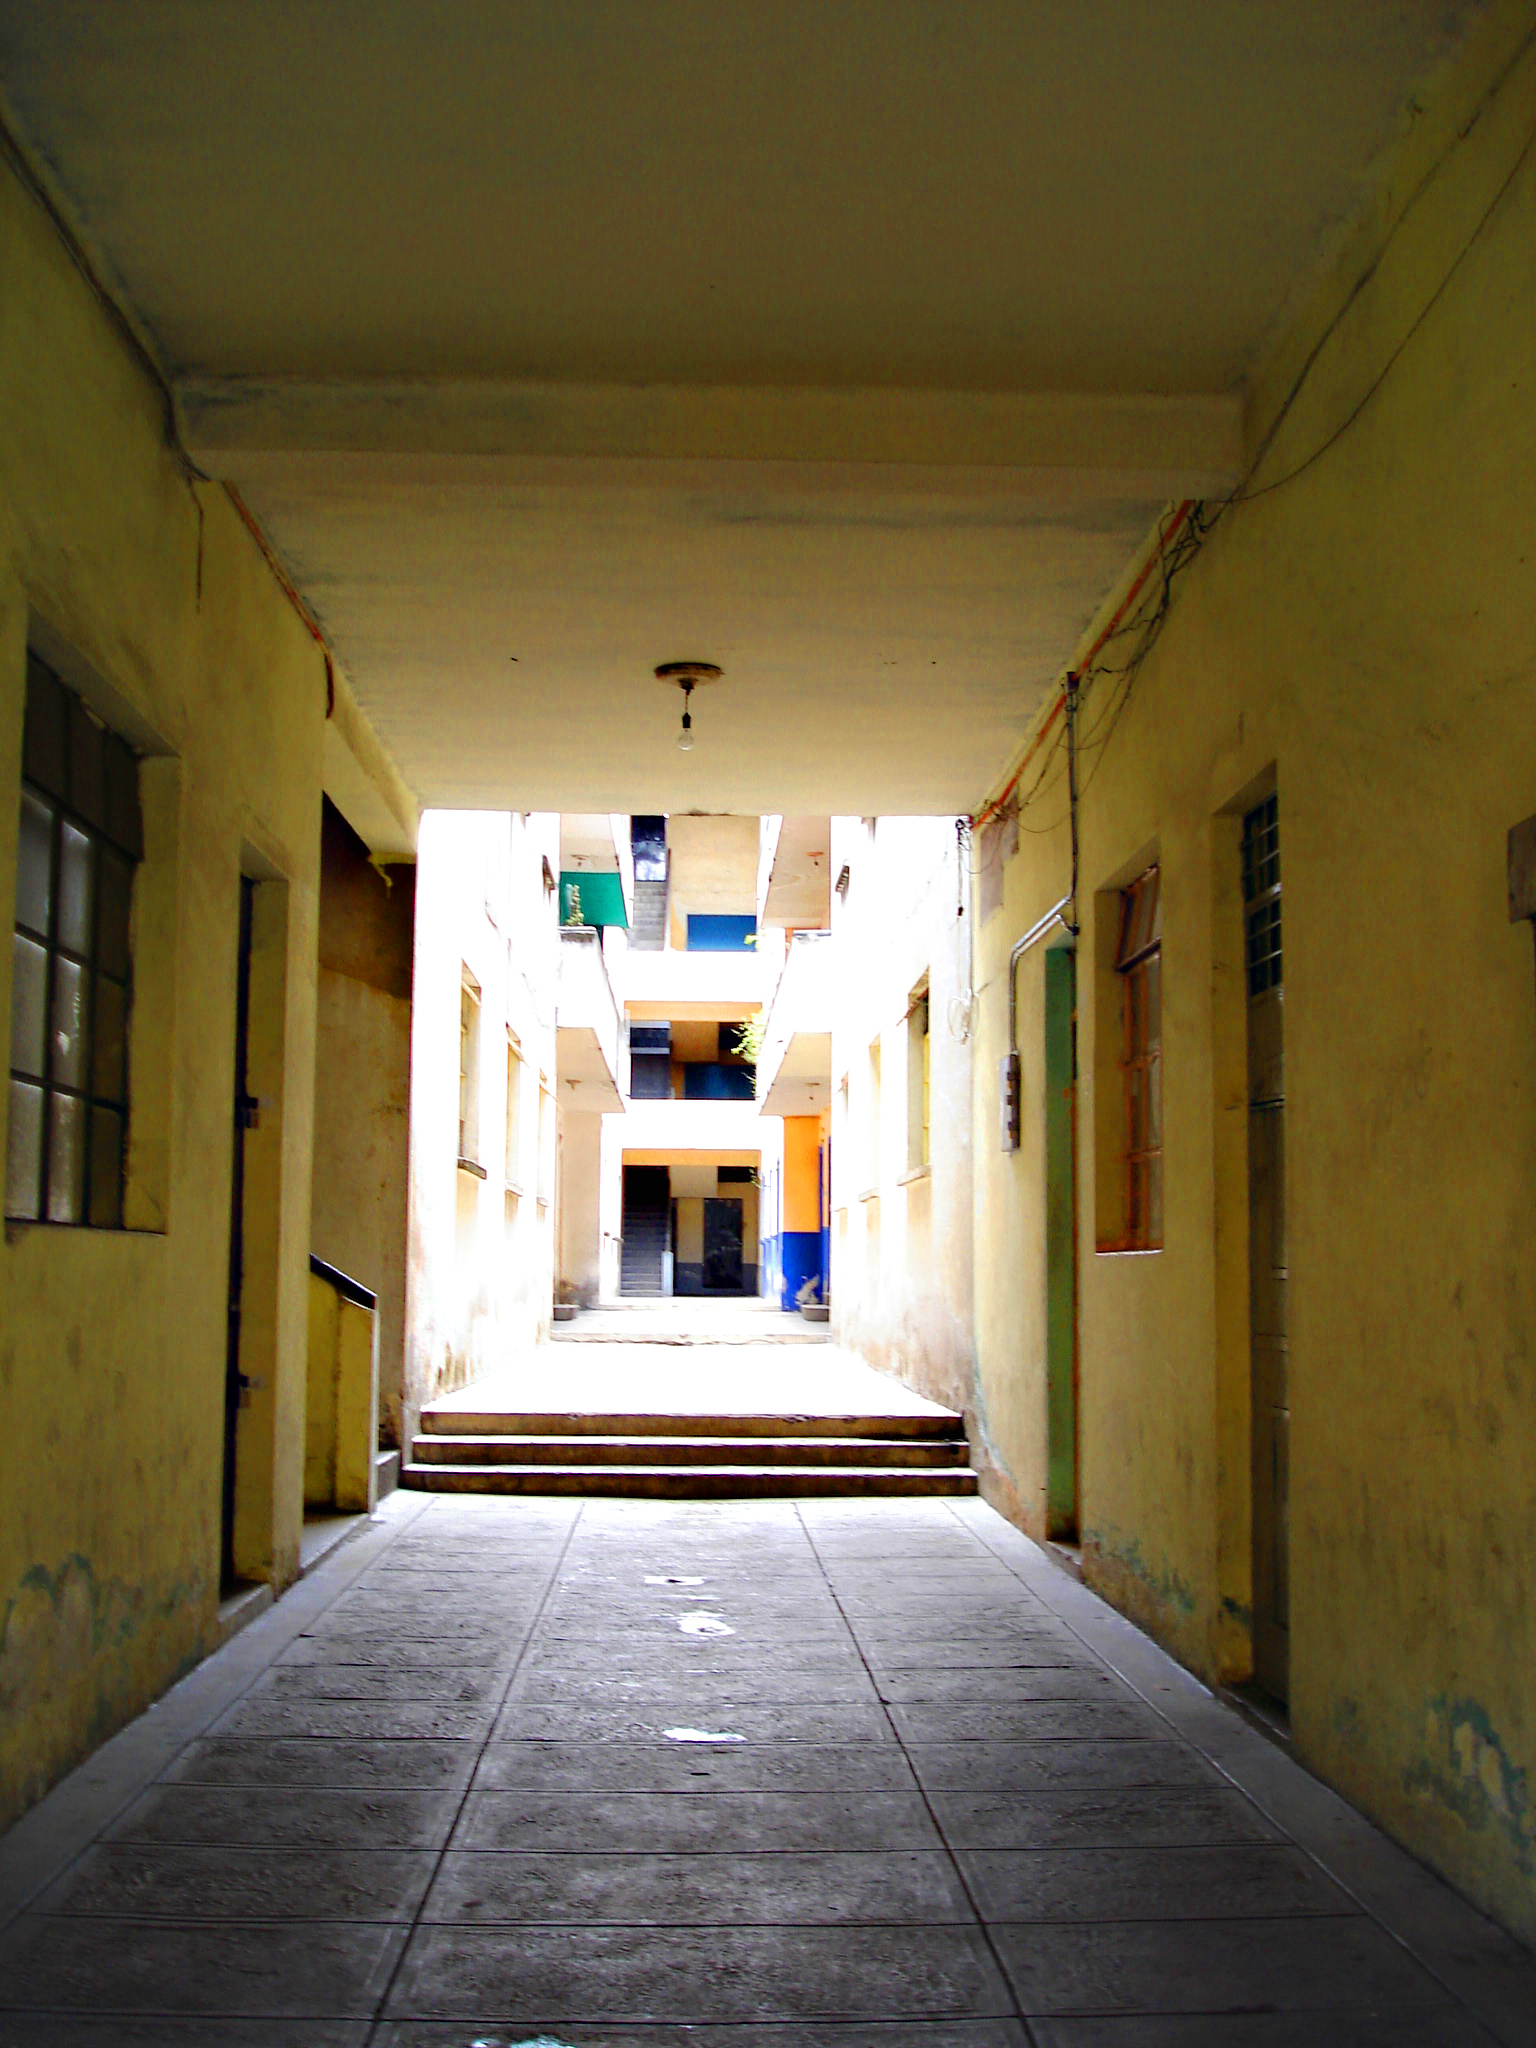 an empty hallway is shown in this image